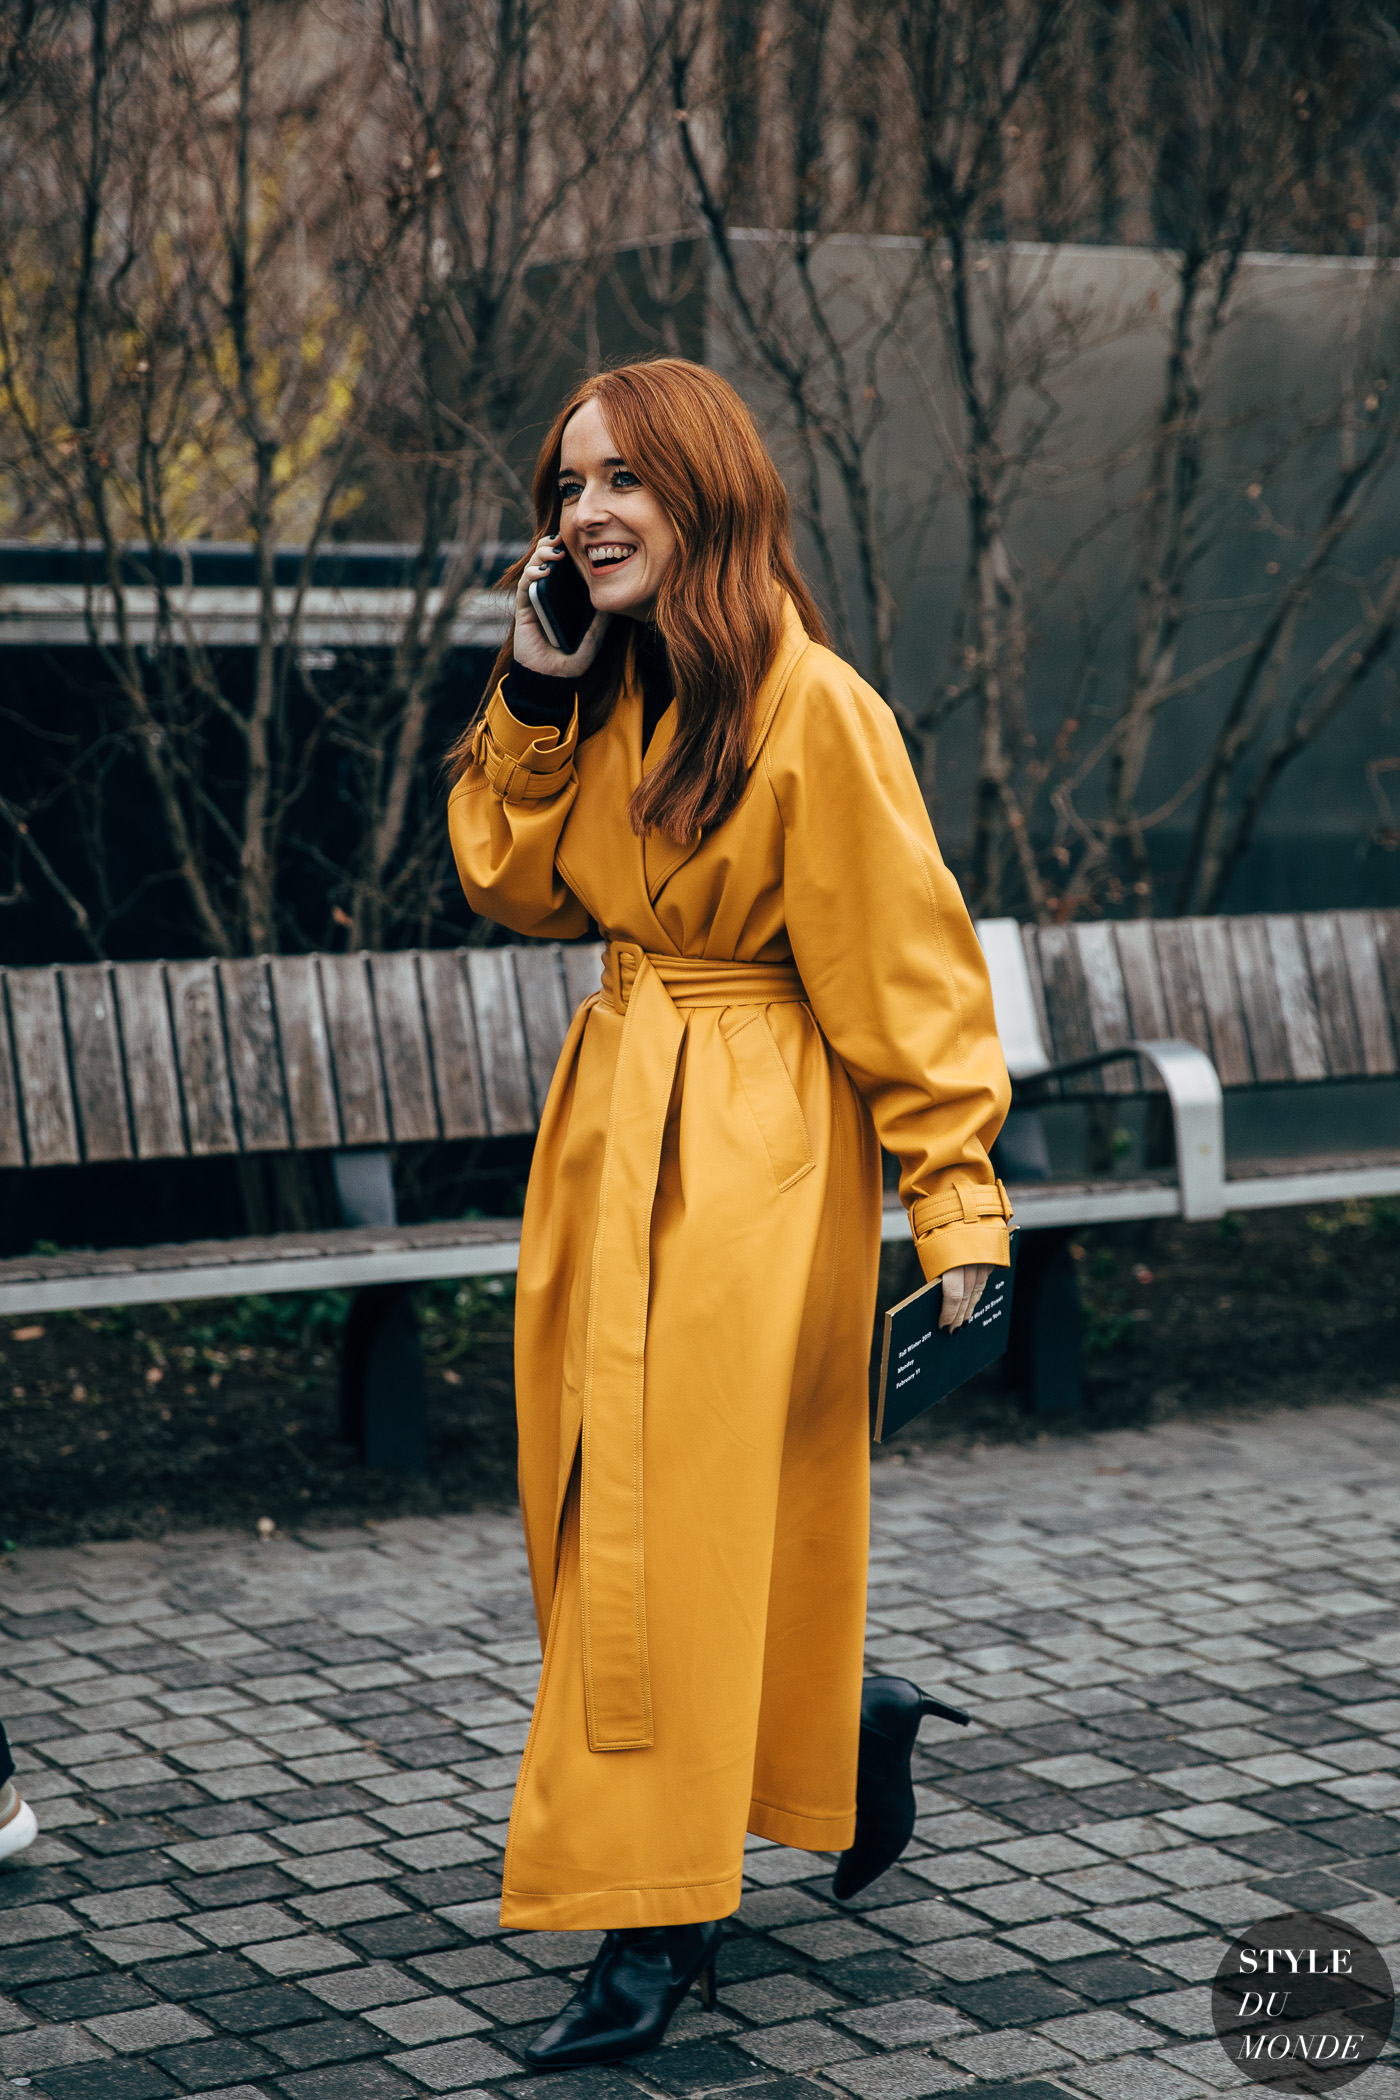 New York FW 2019 Street Style: Libby Jane Page